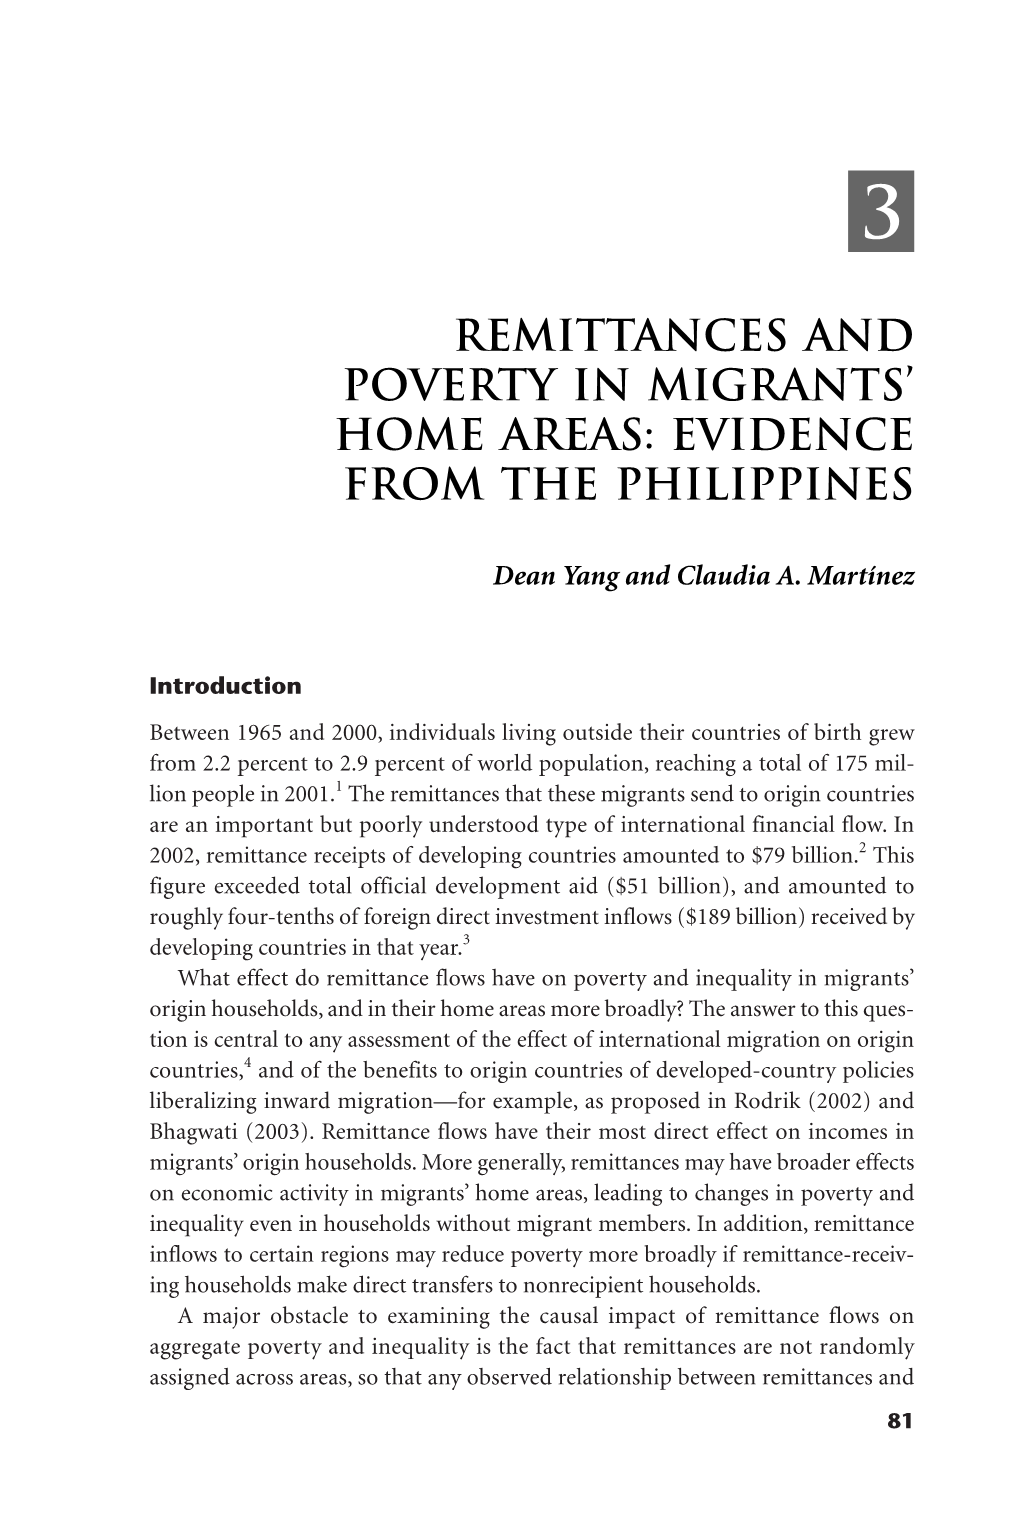 Remittances and Poverty in Migrants' Home Areas